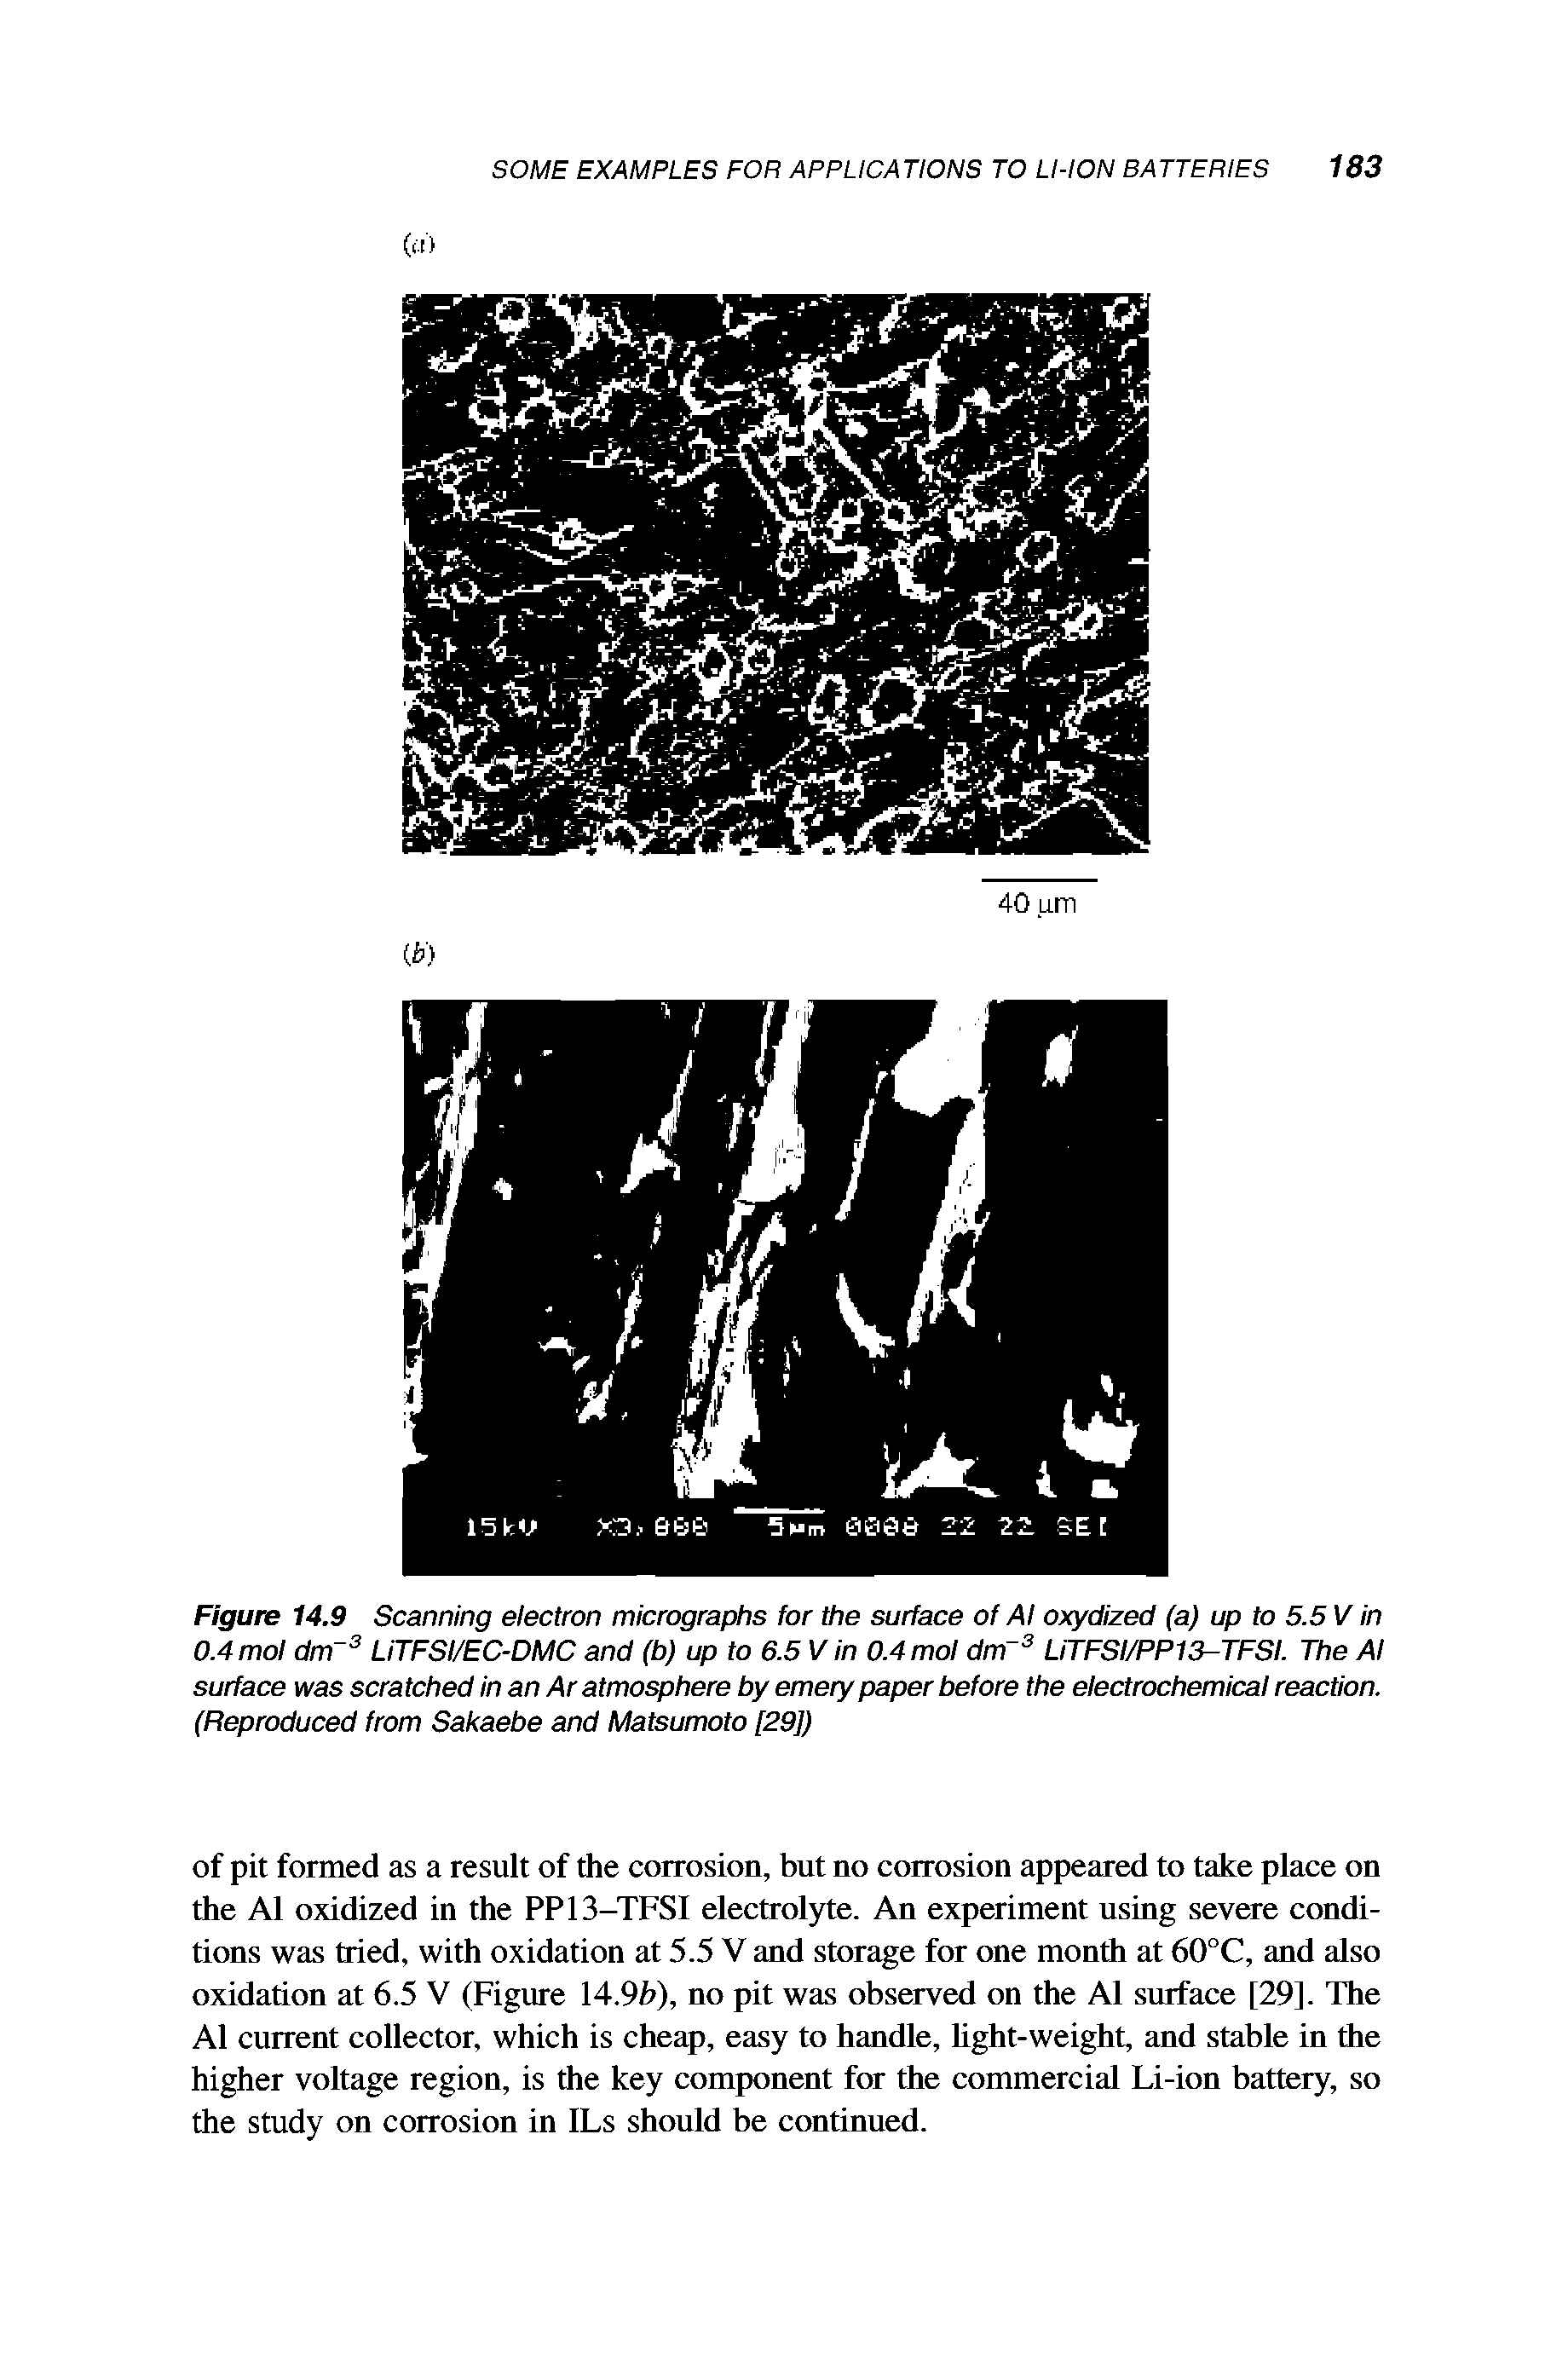 Figure 14.9 Scanning electron micrographs for the surface of Al oxydized (a) up to 5.5 V in 0.4 mol dm- LiTFSI/EC-DMC and (b) up to 6.5 V in 0.4 mol dm UTFSI/PP13-TFSI. The Al surface tvas scratched in an Ar atmosphere by emery paper before the electrochemical reaction. (Reproduced from Sakaebe and Matsumoto [29])...